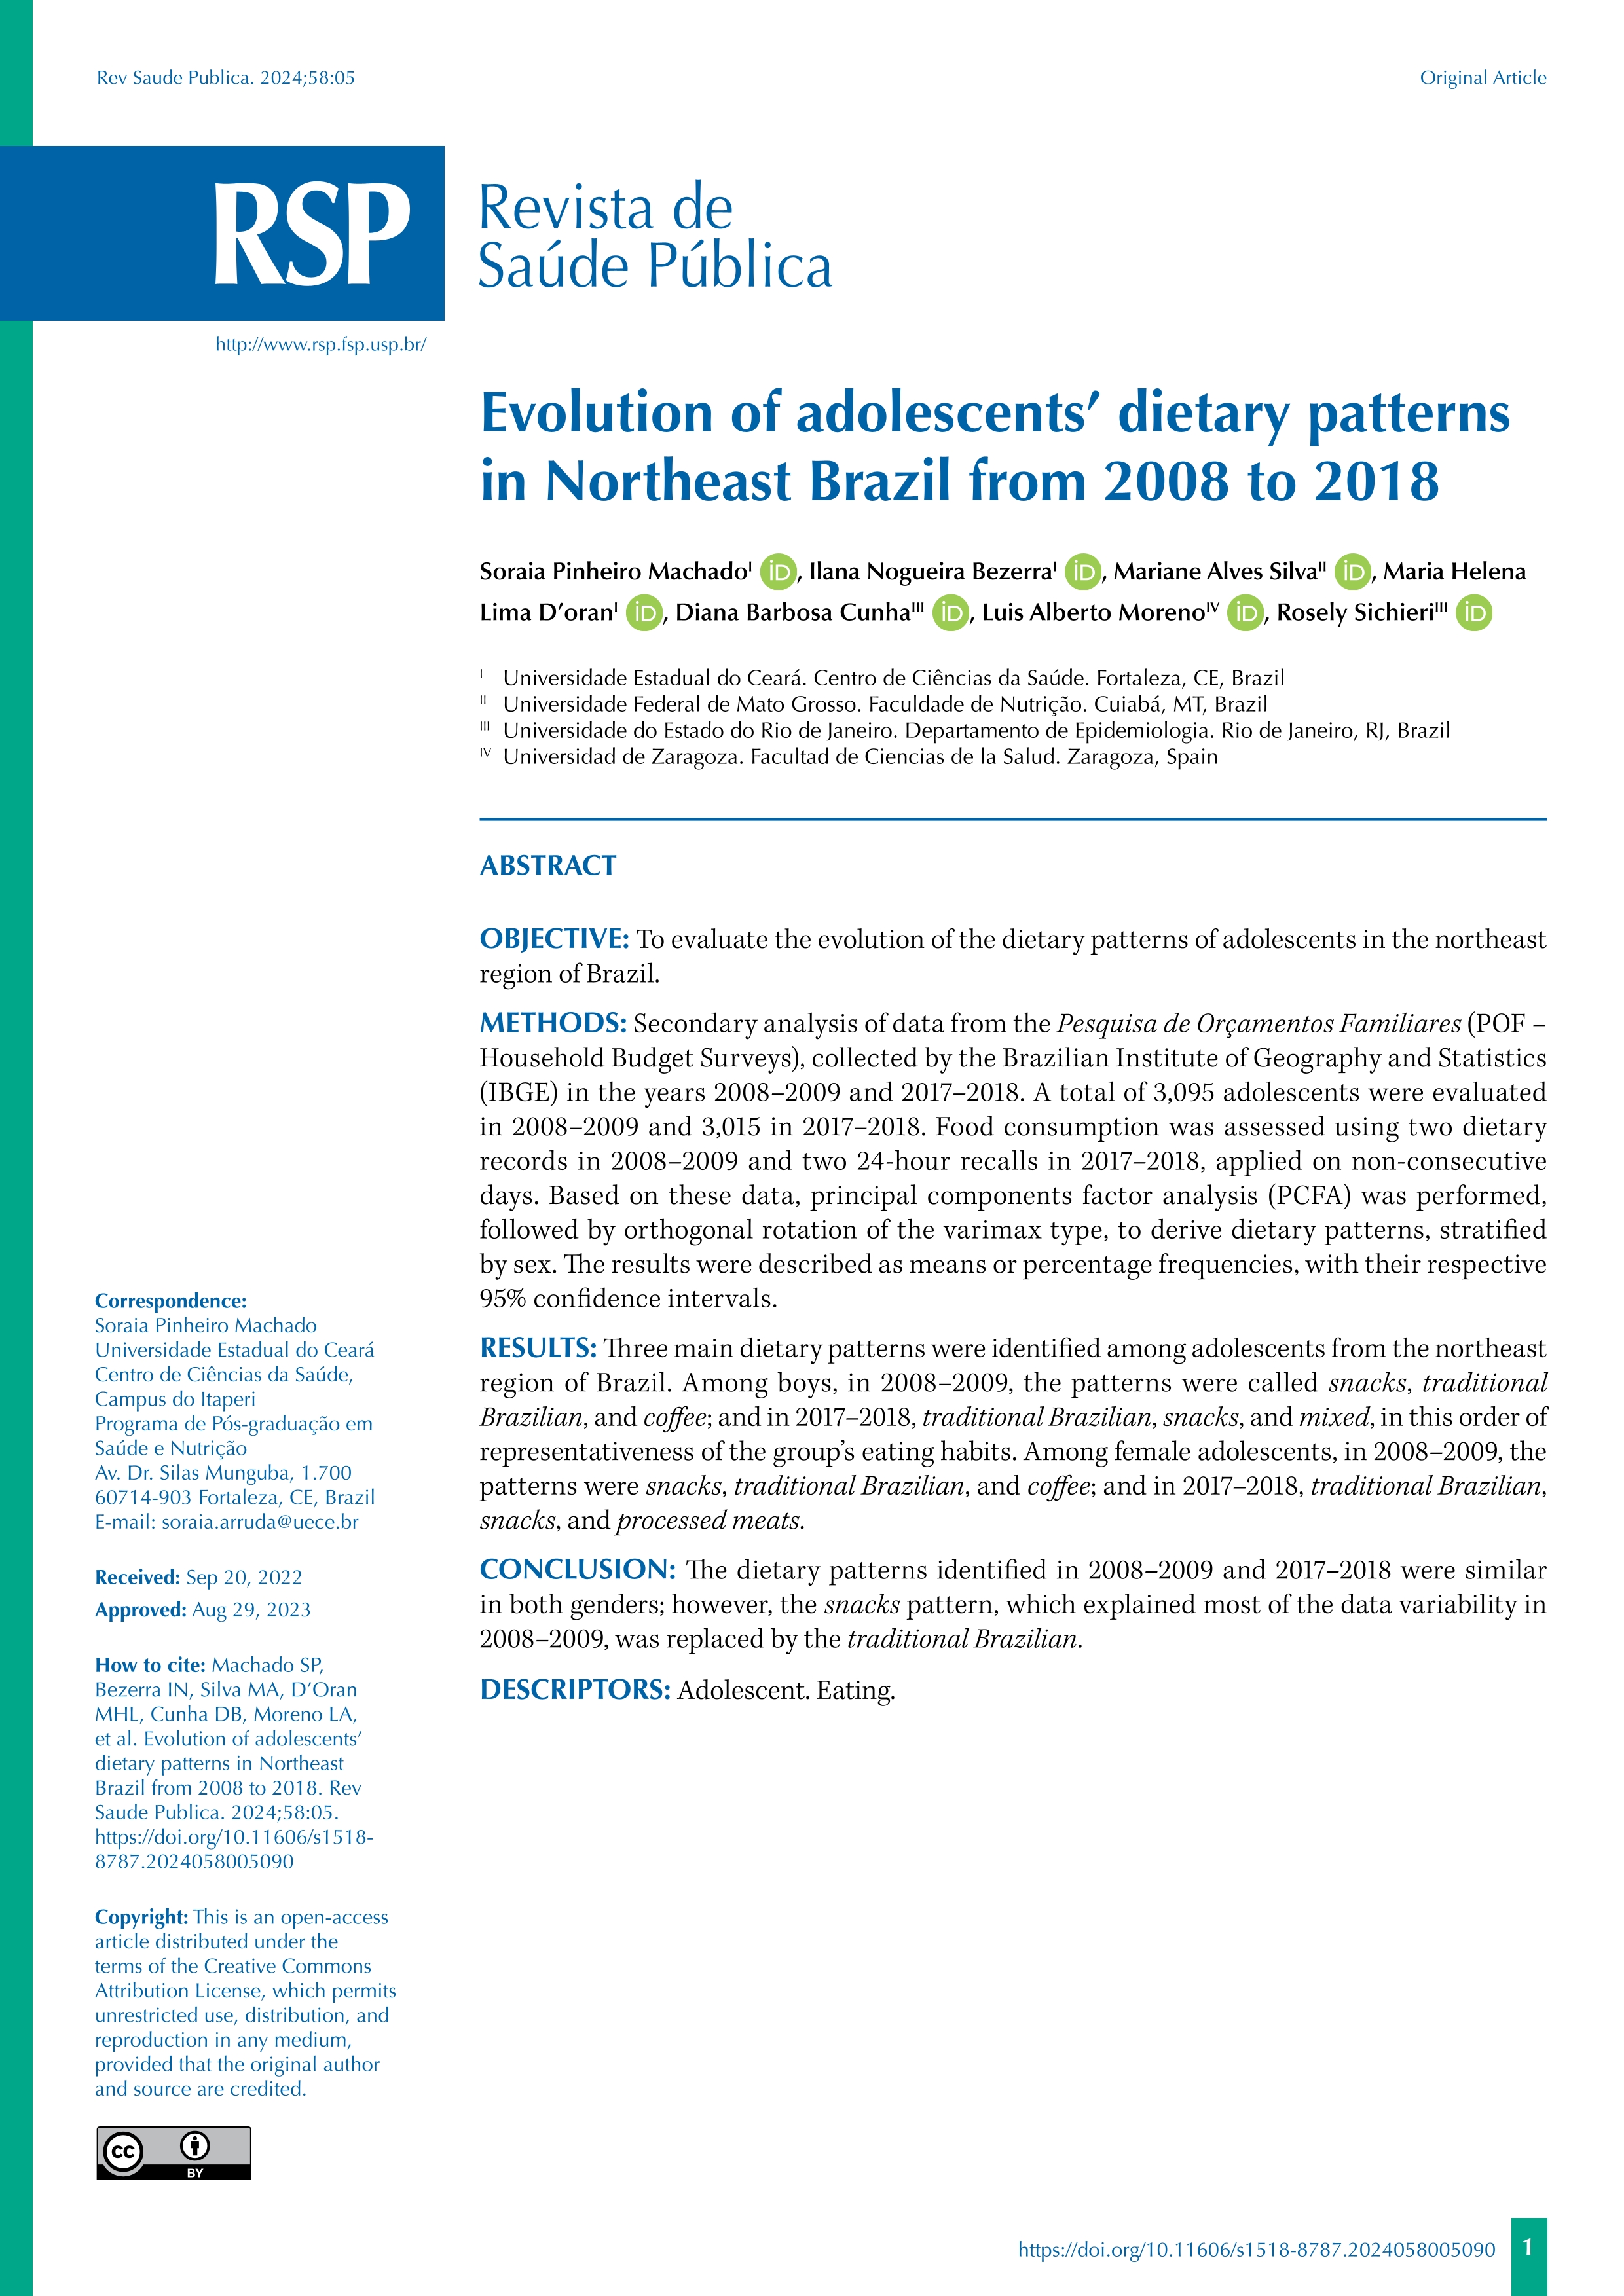 Evolution of adolescents’ dietary patterns in Northeast Brazil from 2008 to 2018